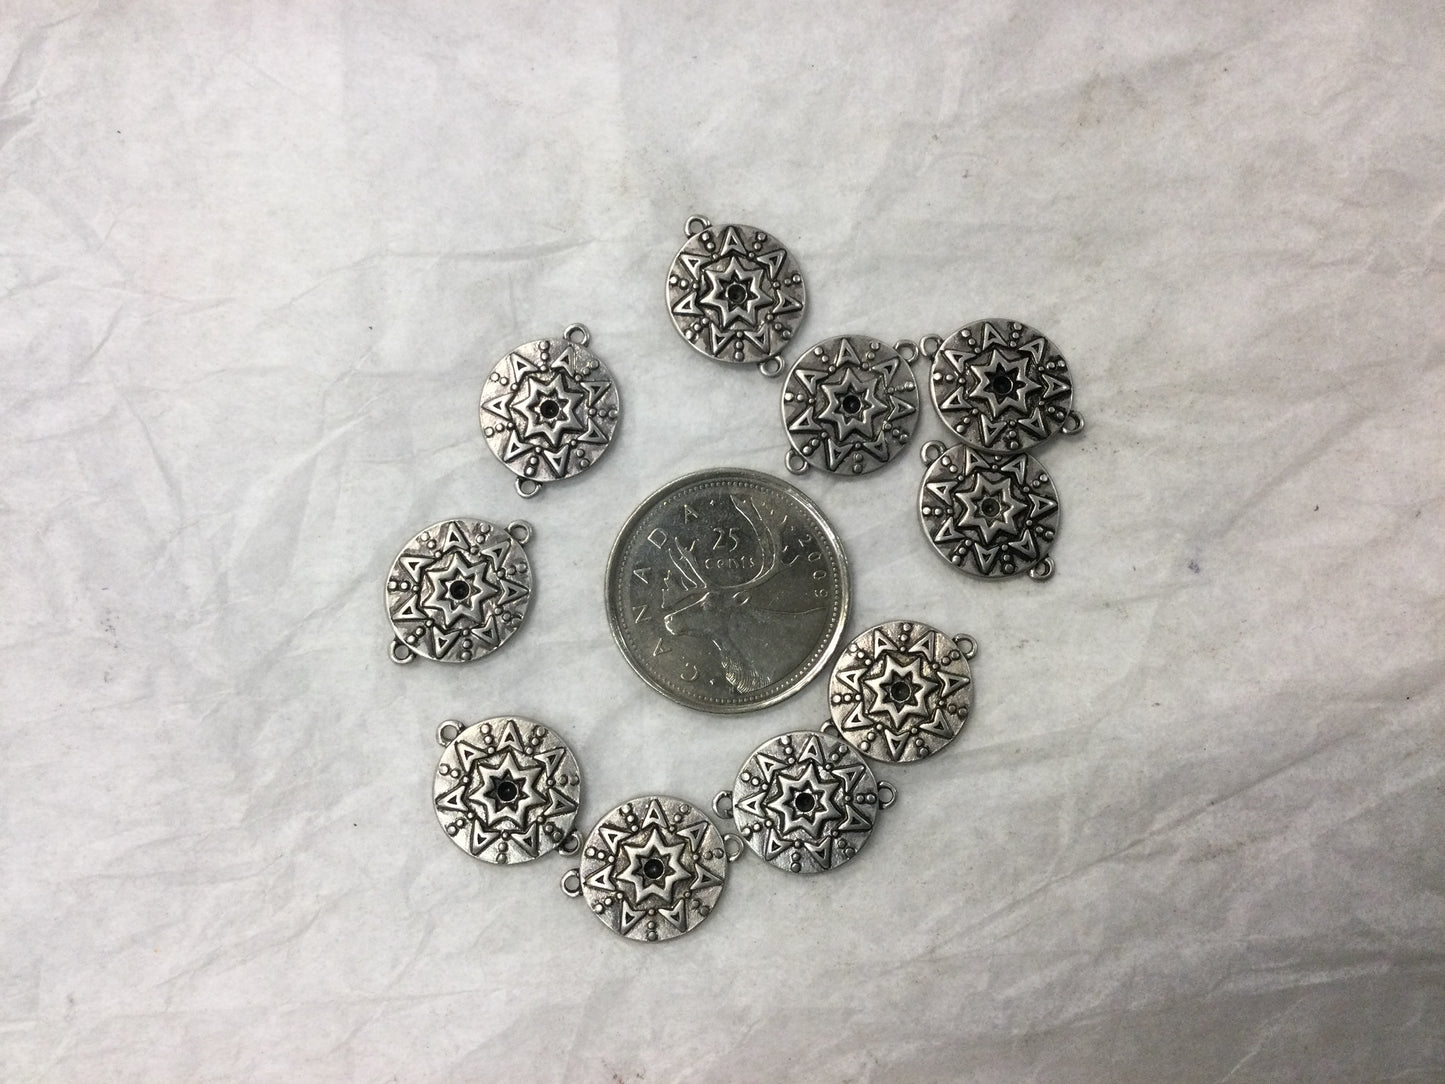 Radiating 7 Pointed Star Coin Charm, Antique Silver Plated